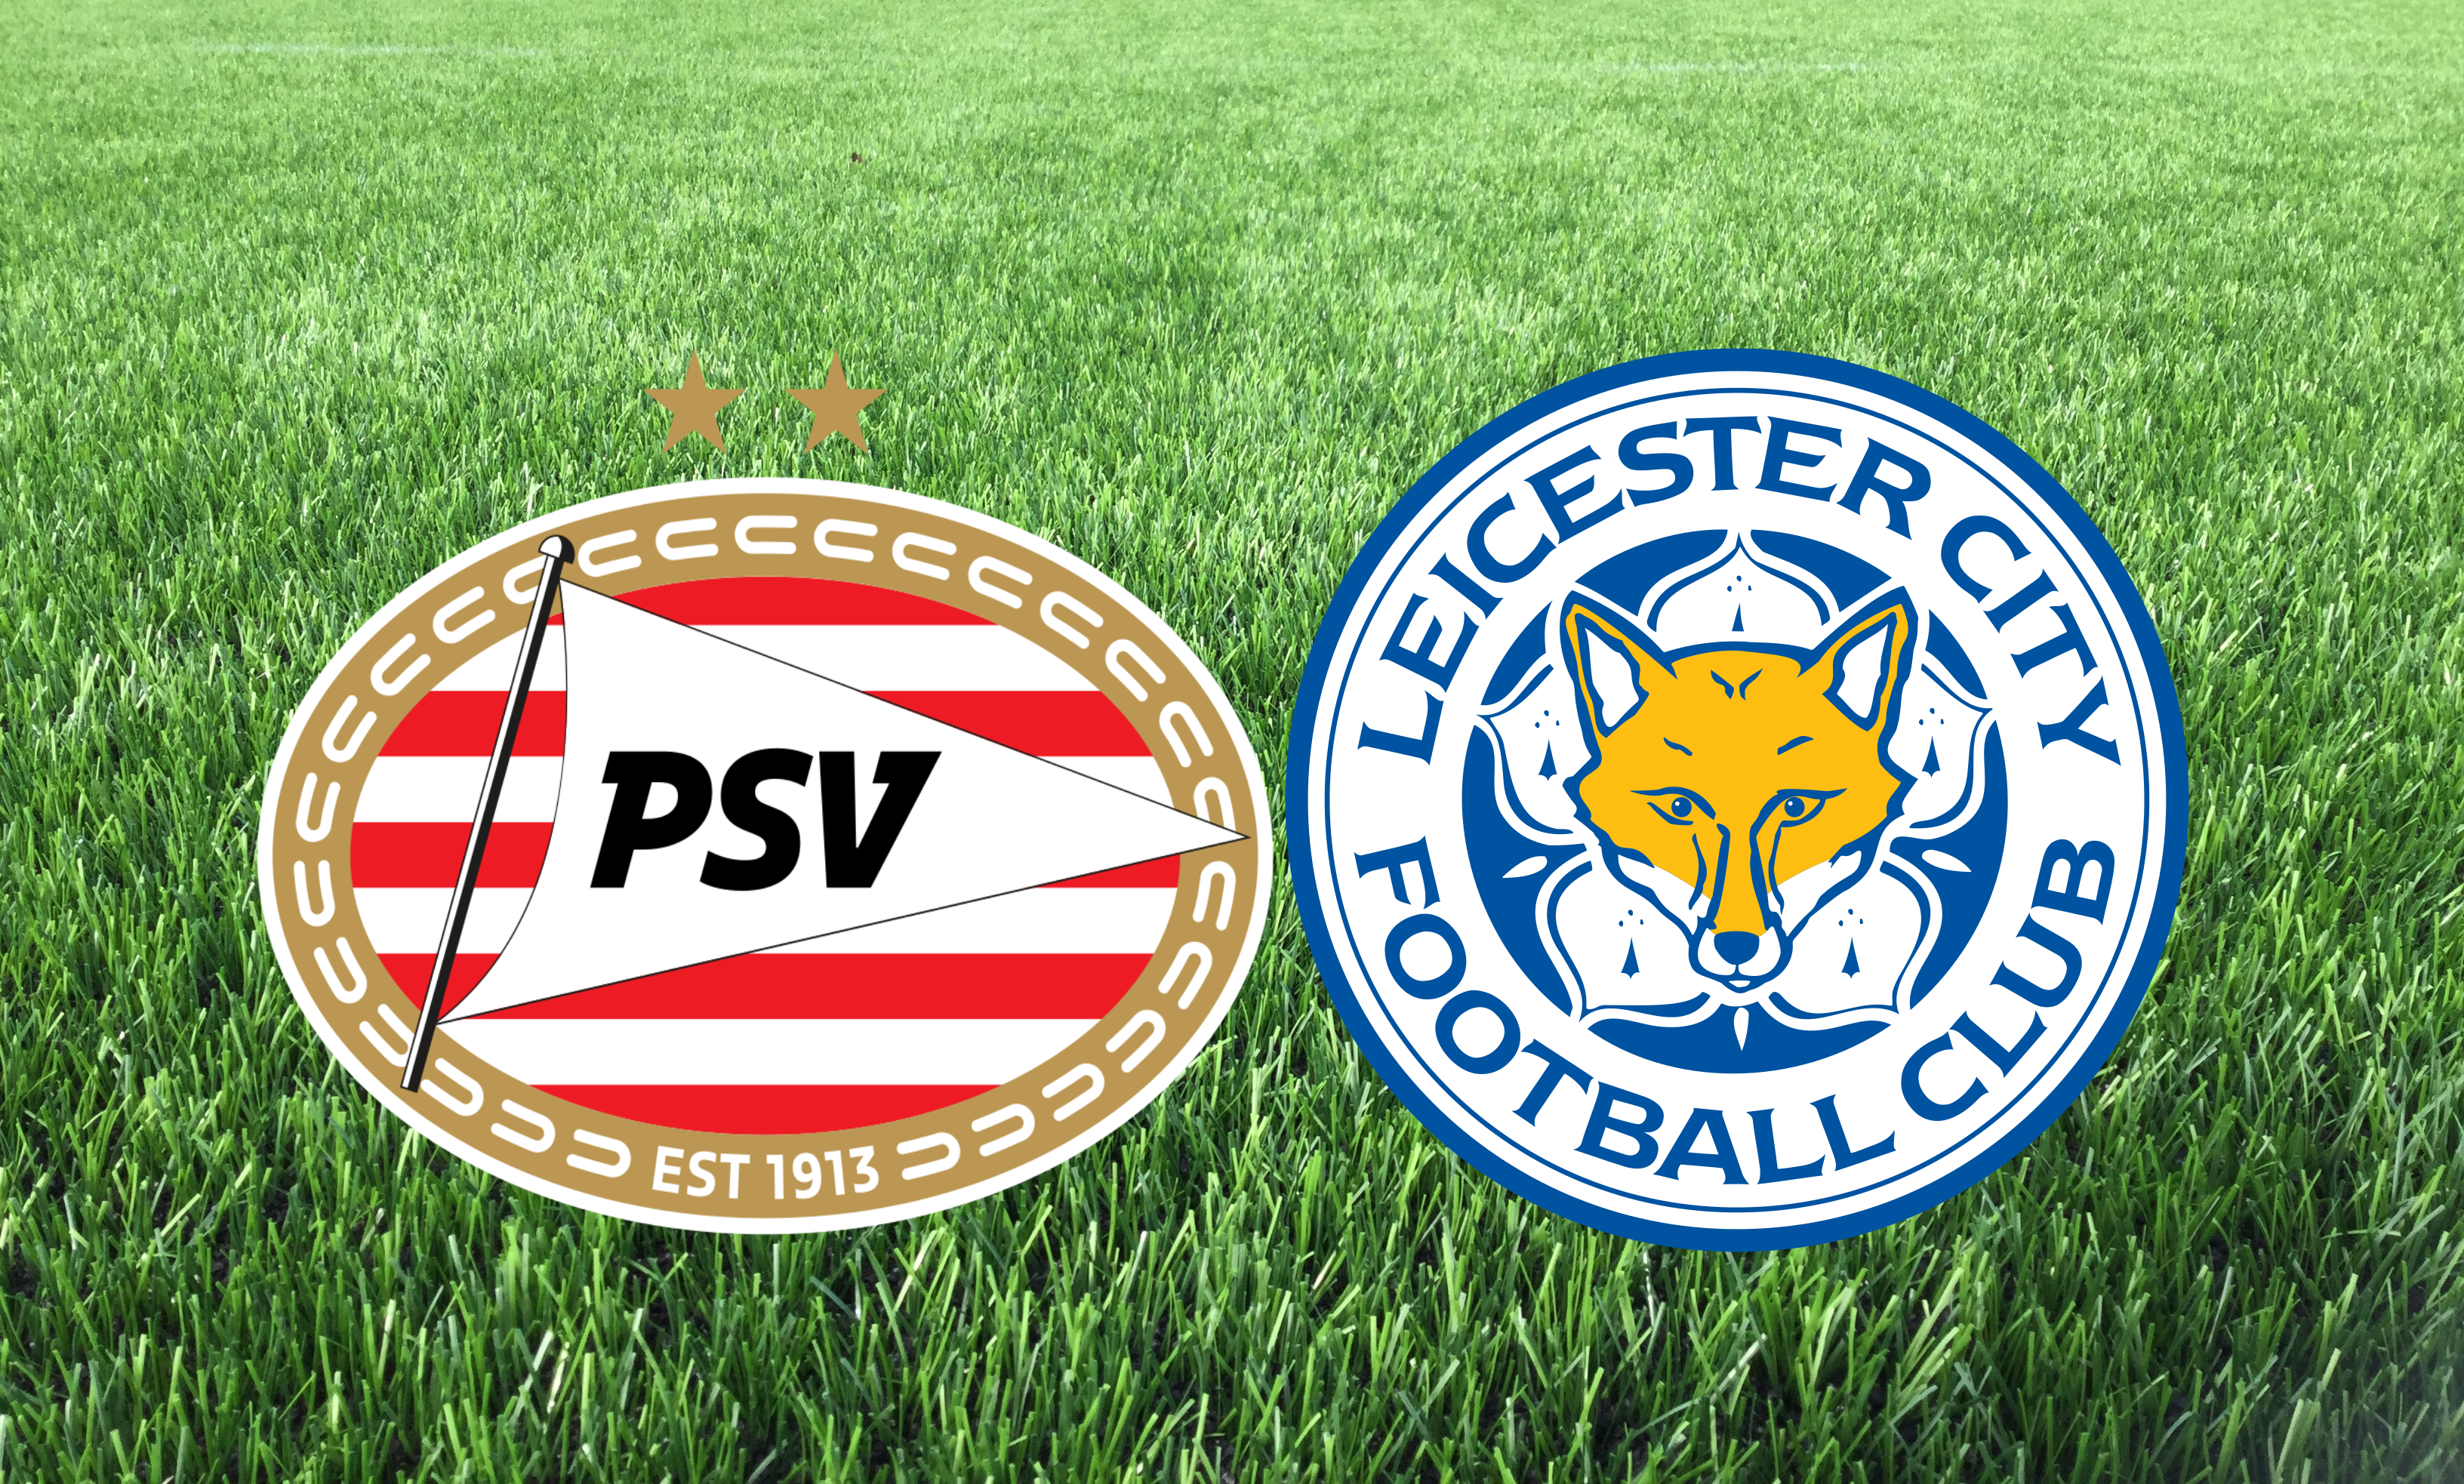 City psv leicester f.c. eindhoven lwn oldham athletic